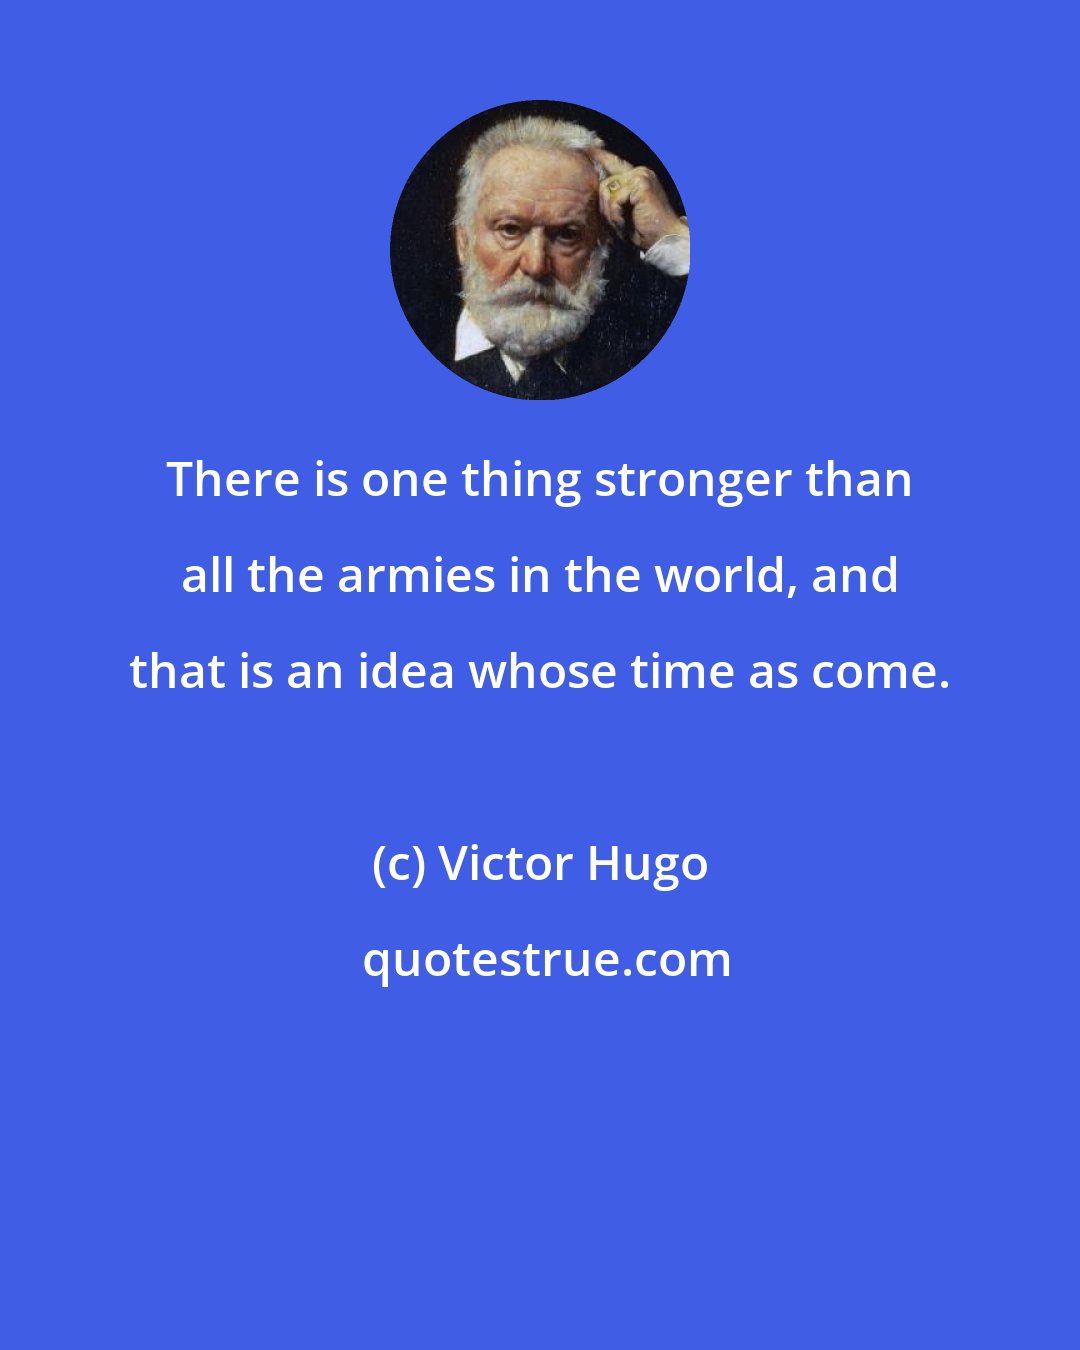 Victor Hugo: There is one thing stronger than all the armies in the world, and that is an idea whose time as come.